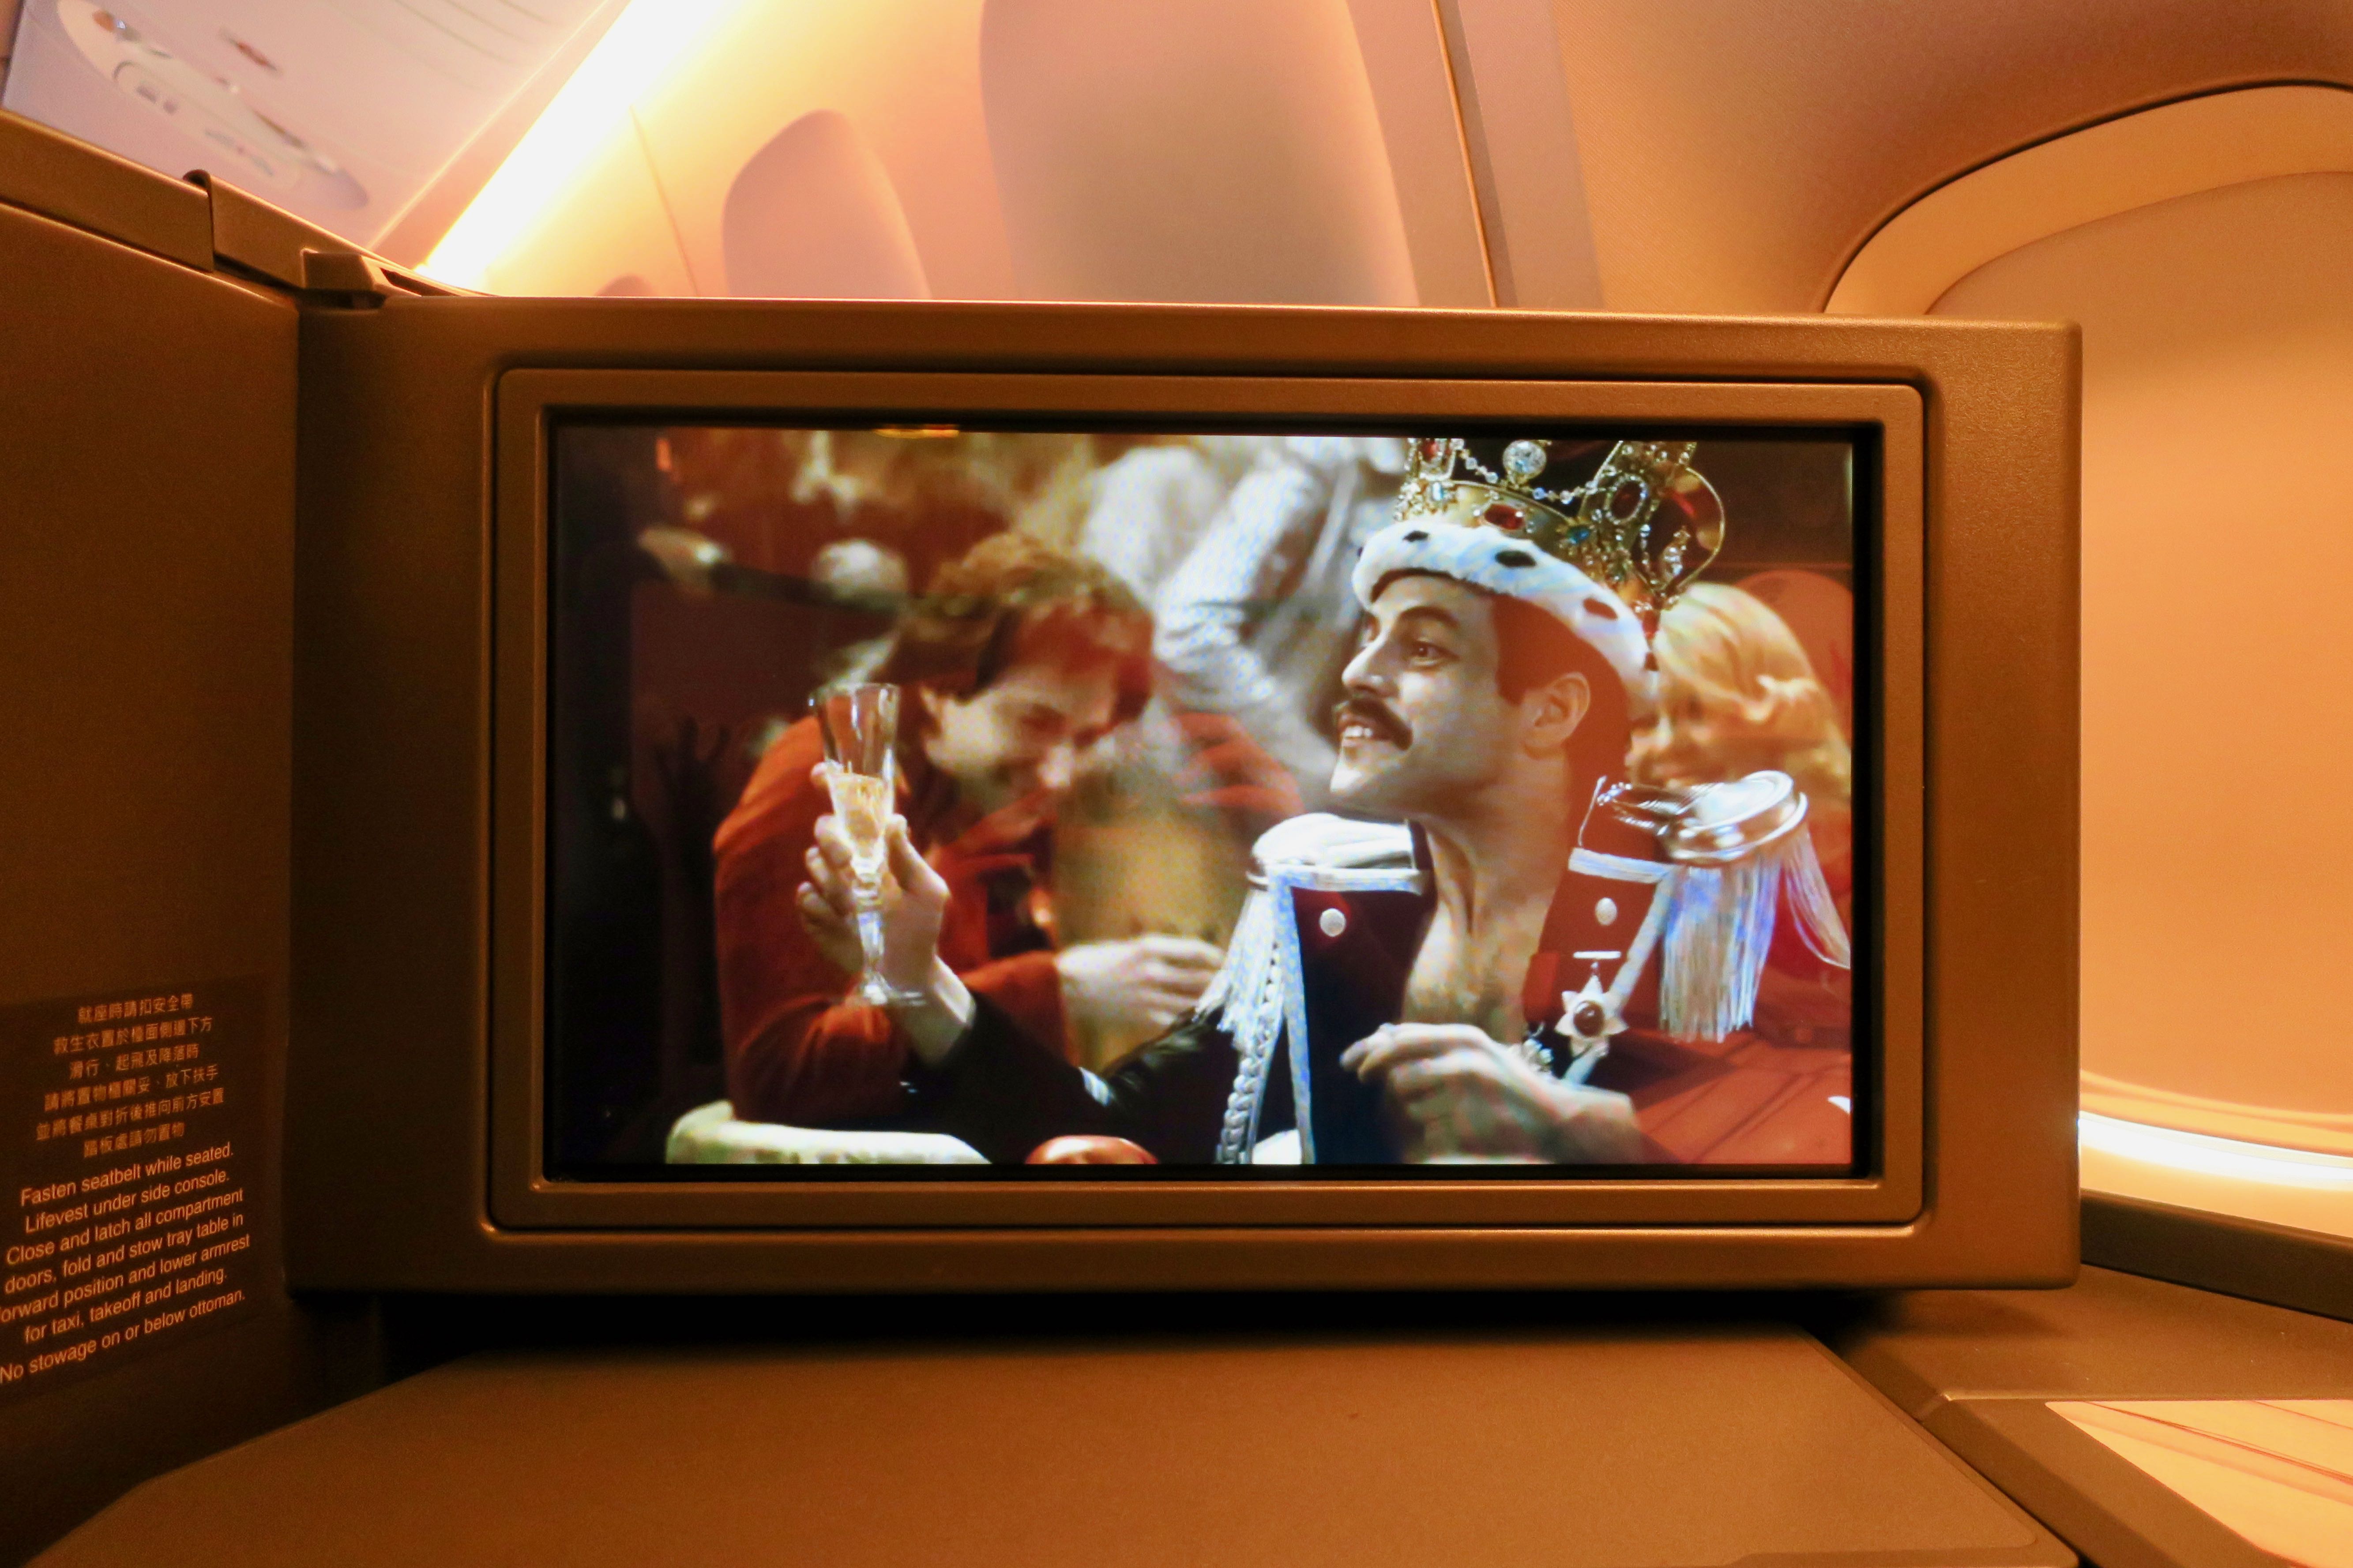 China Airlines Business Class inflight entertainment screen